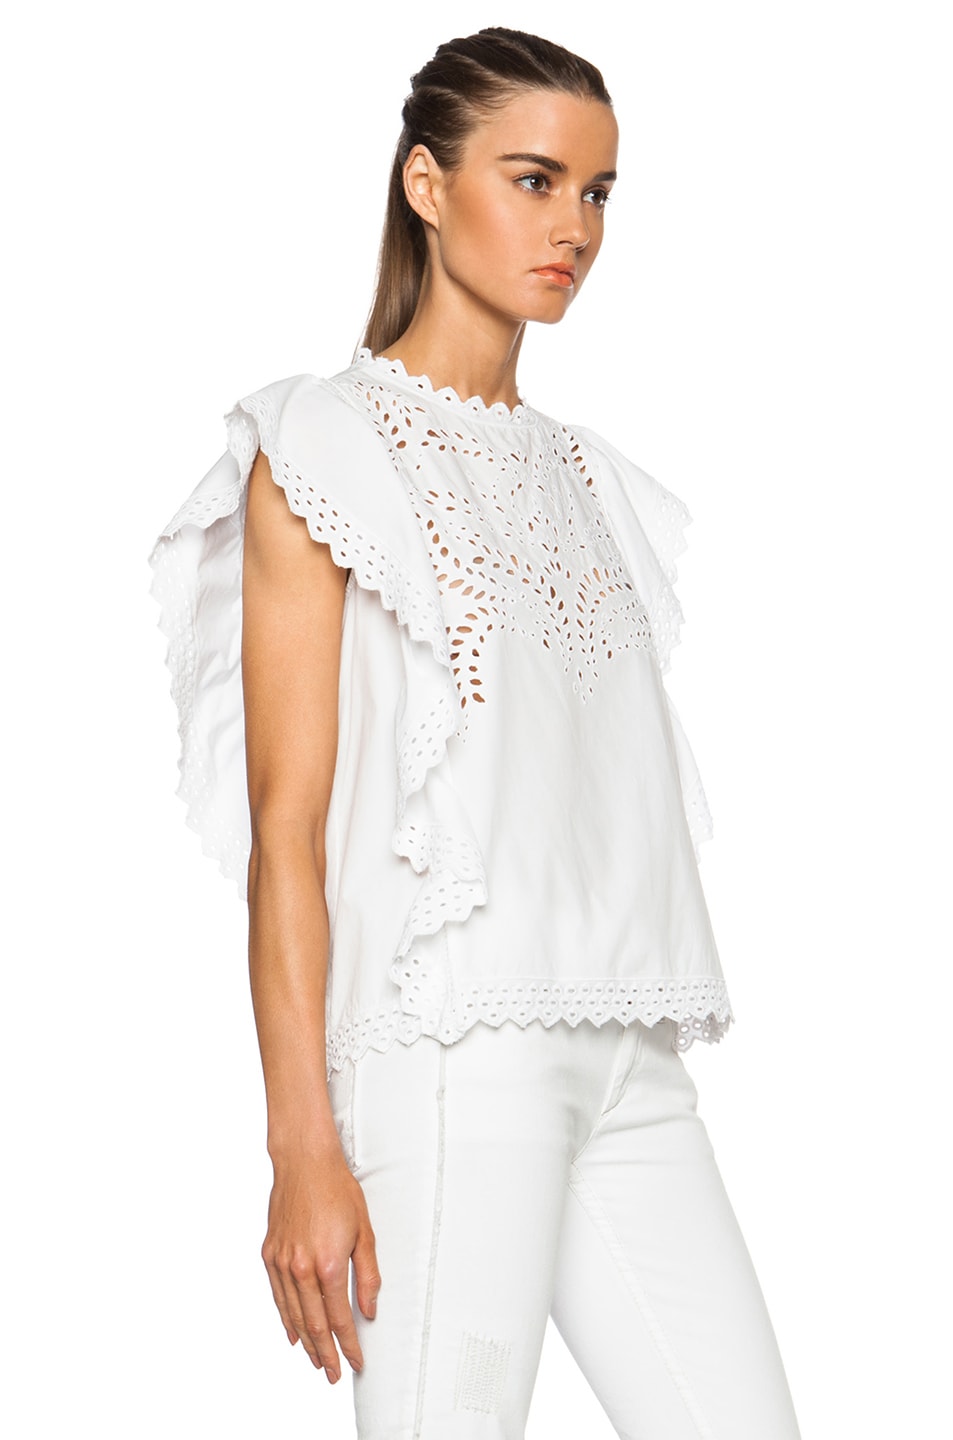 Isabel Marant Etoile Salvia French Embroidery Cotton Top in White | FWRD